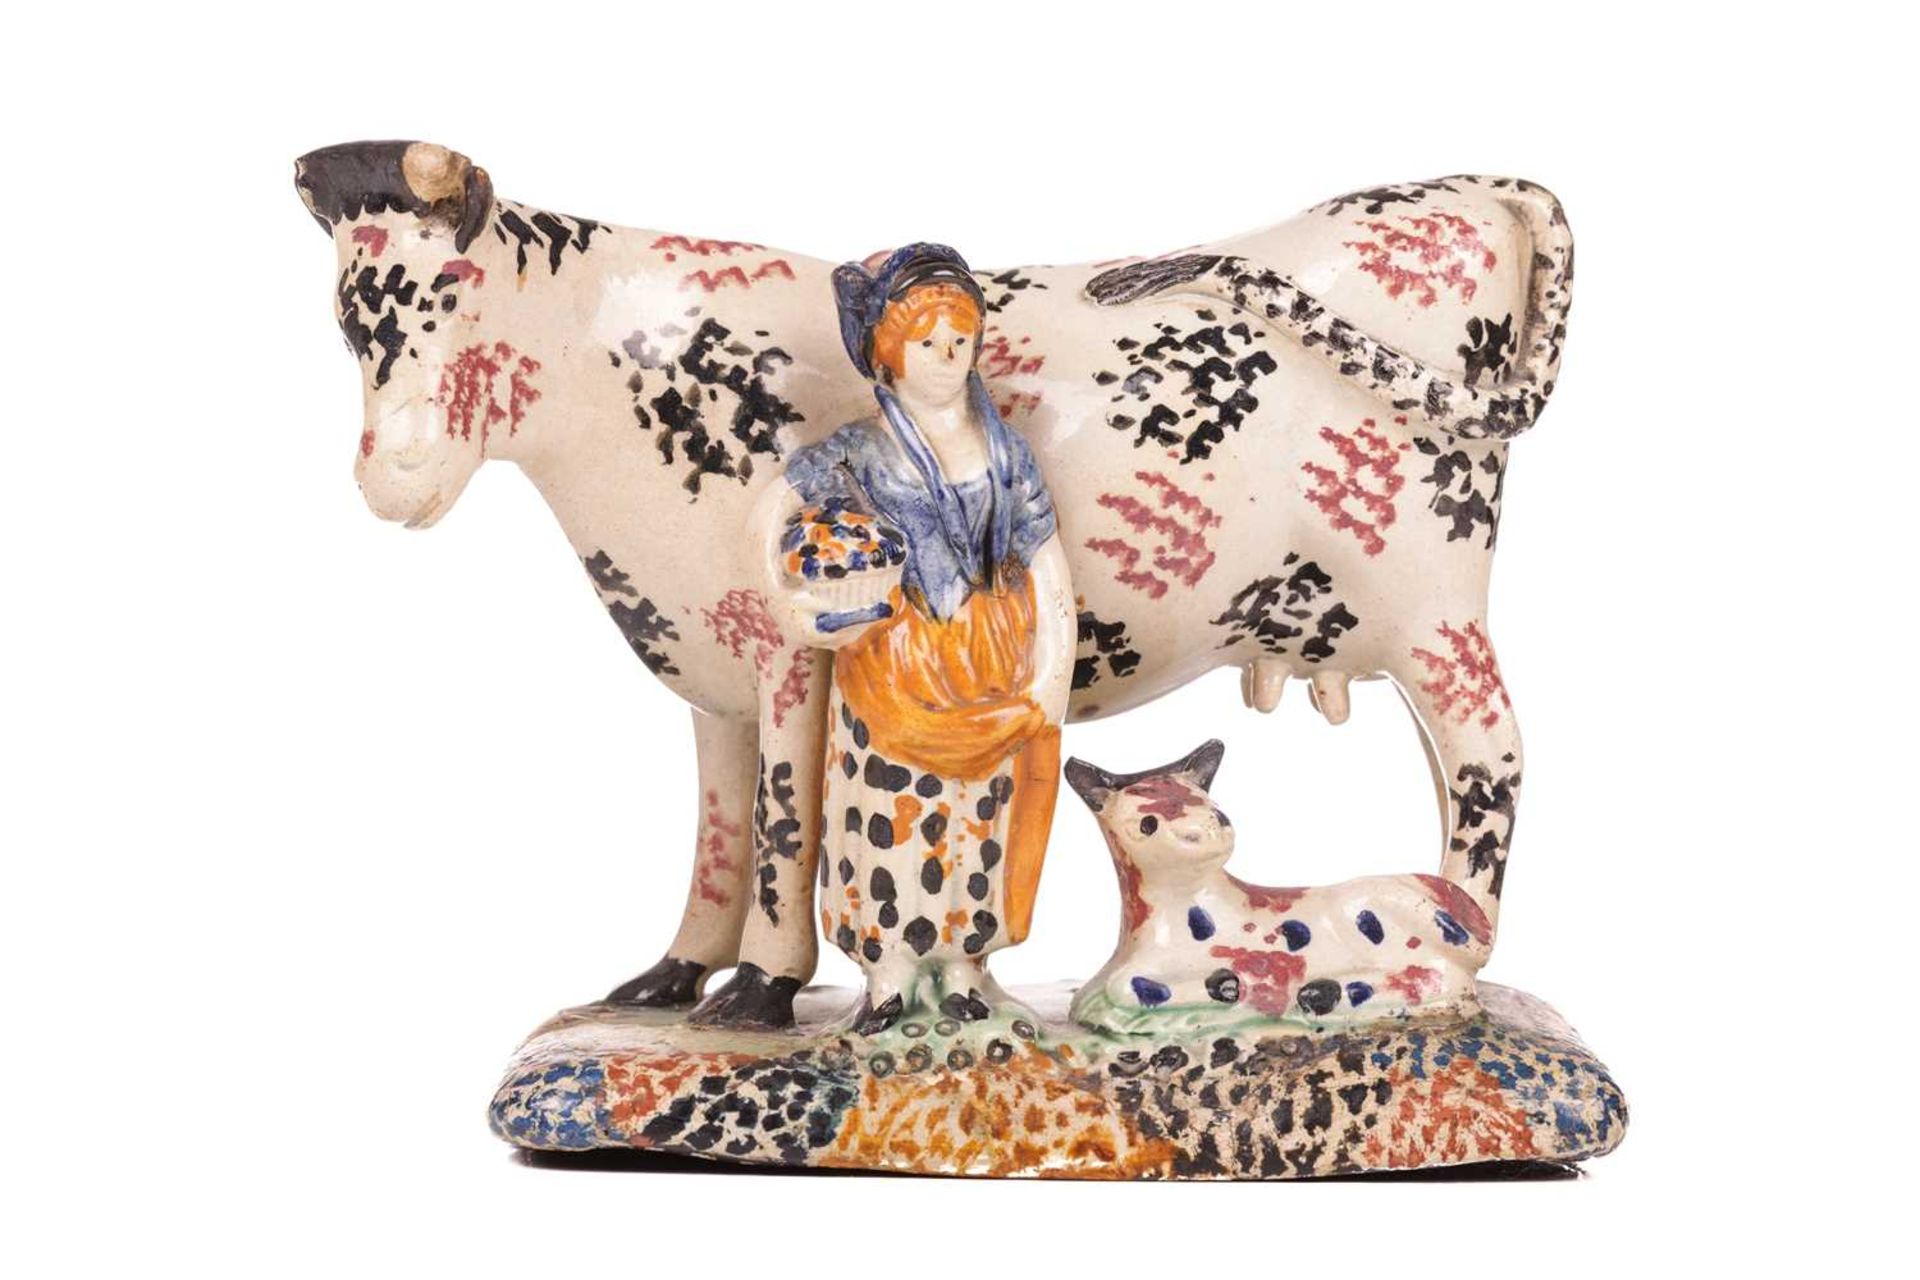 An early 19th-century Prattware ceramic cow, milkmaid and calf figure, circa 1810 with sponged decor